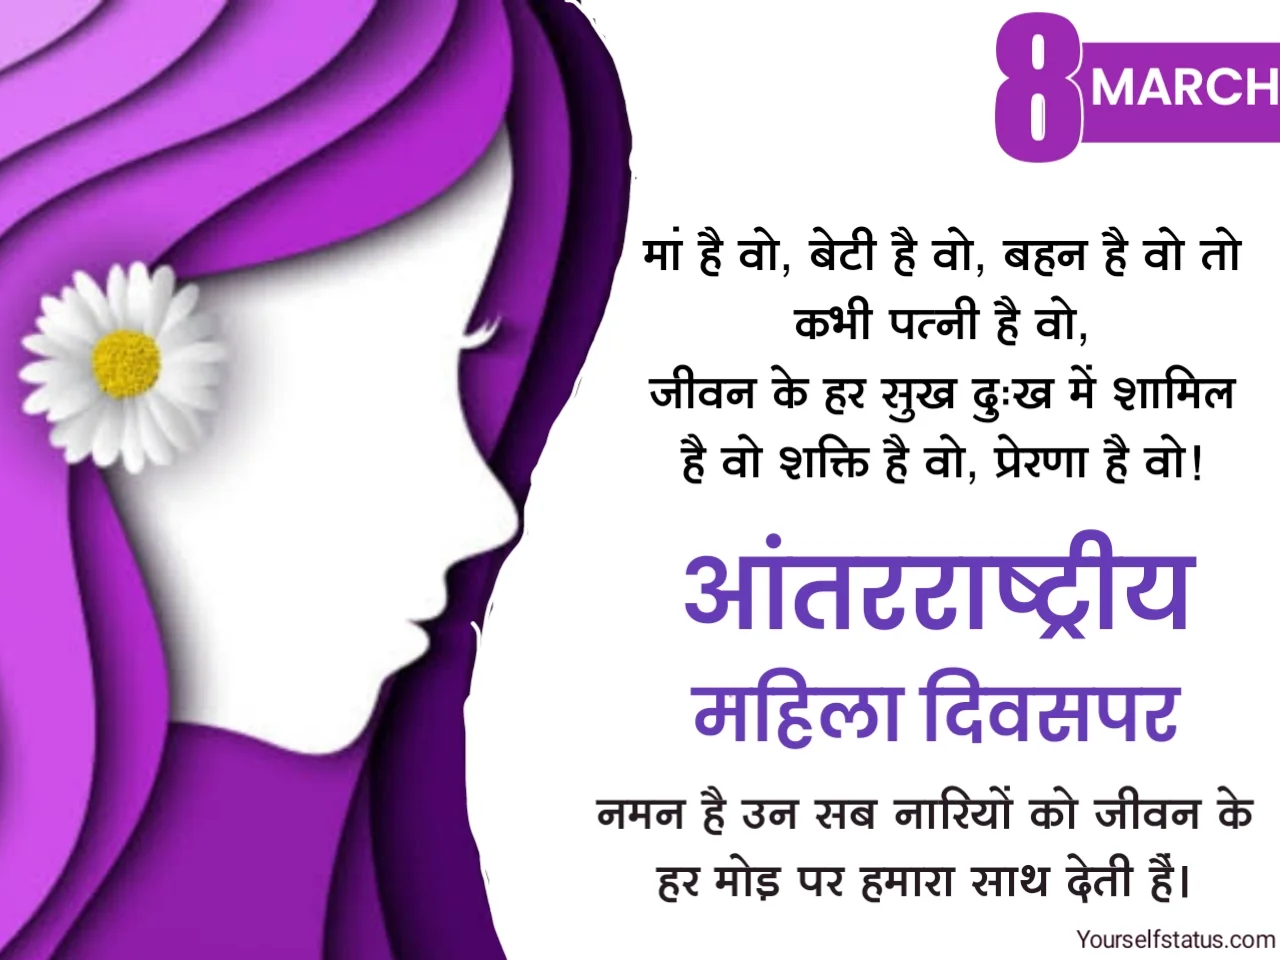 Women's Day quotes in hindi